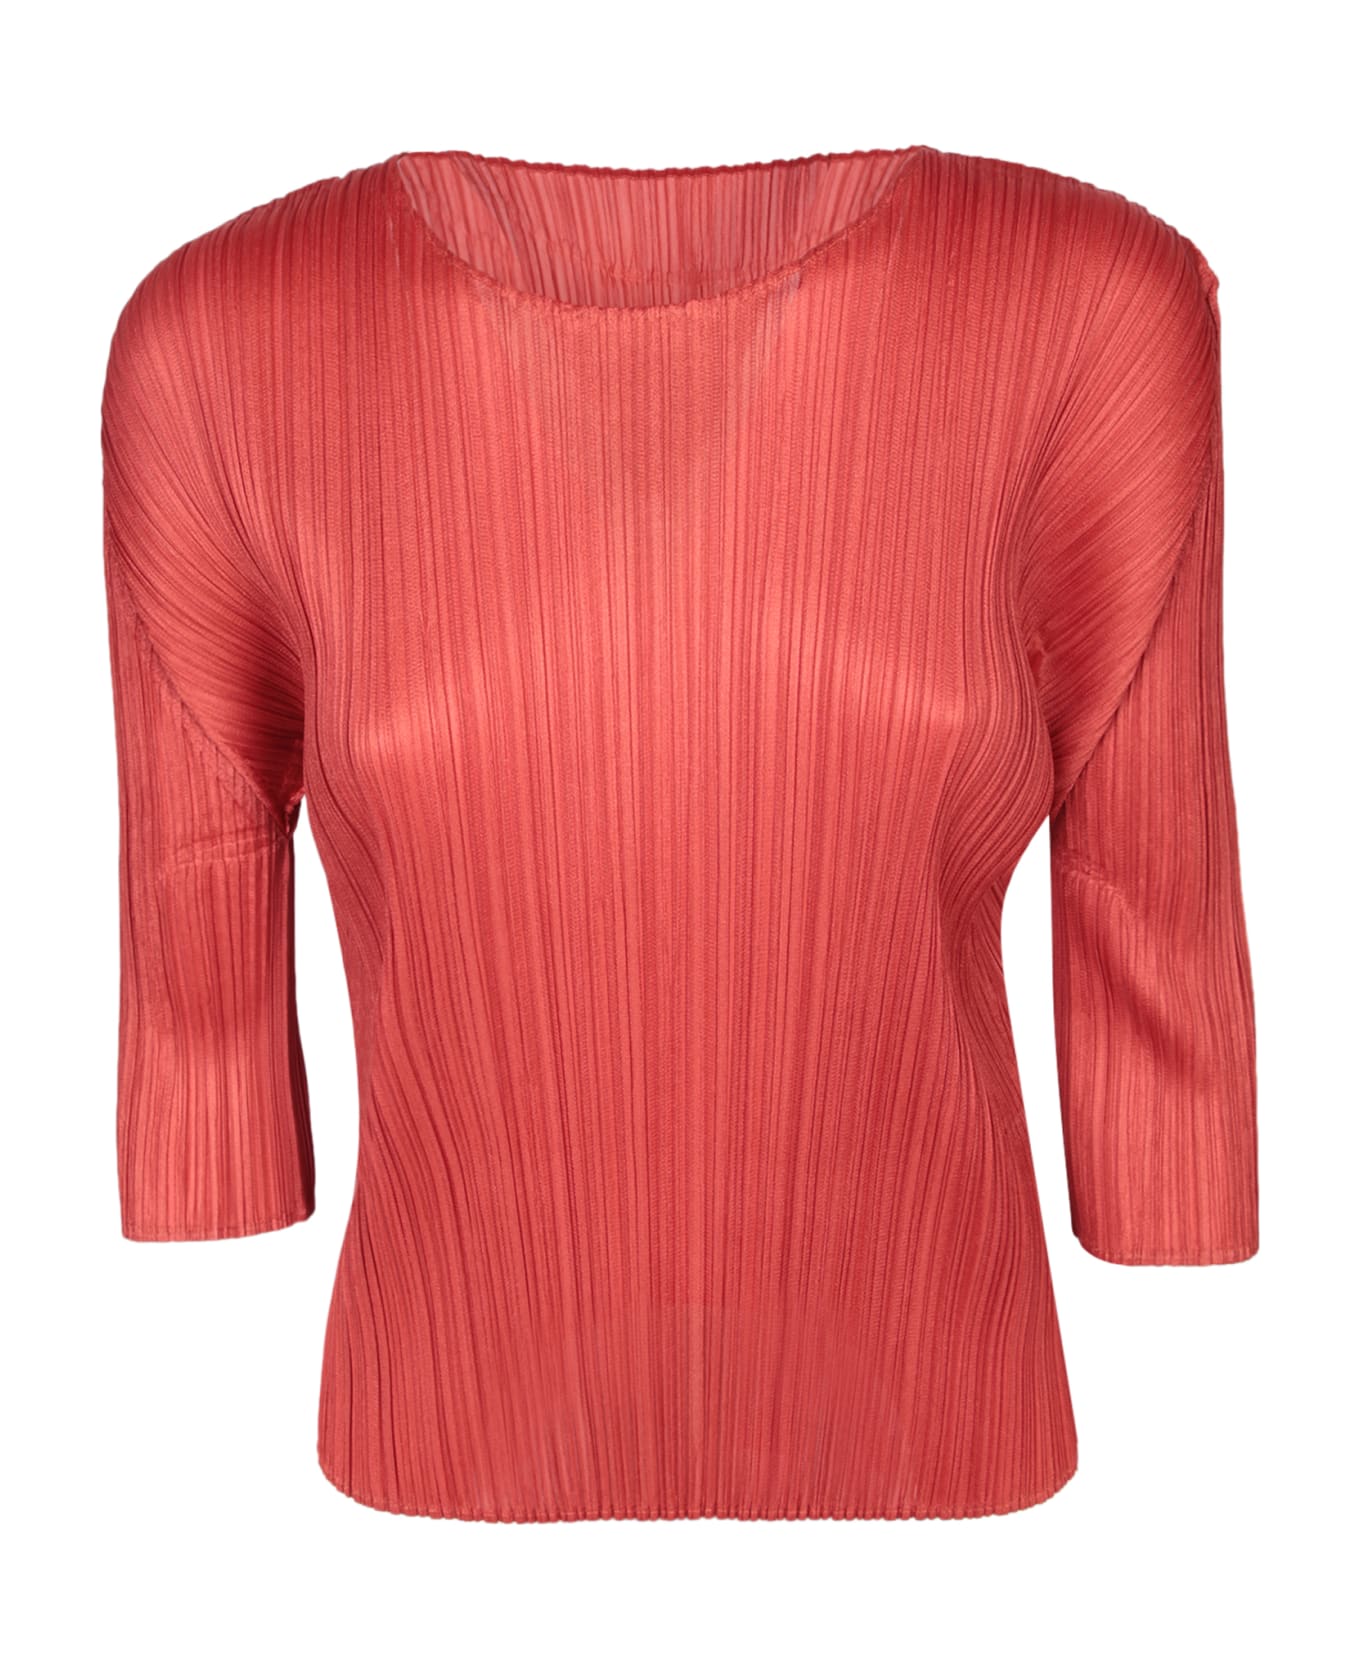 Issey Miyake Pleats Please Red T-shirt - Red